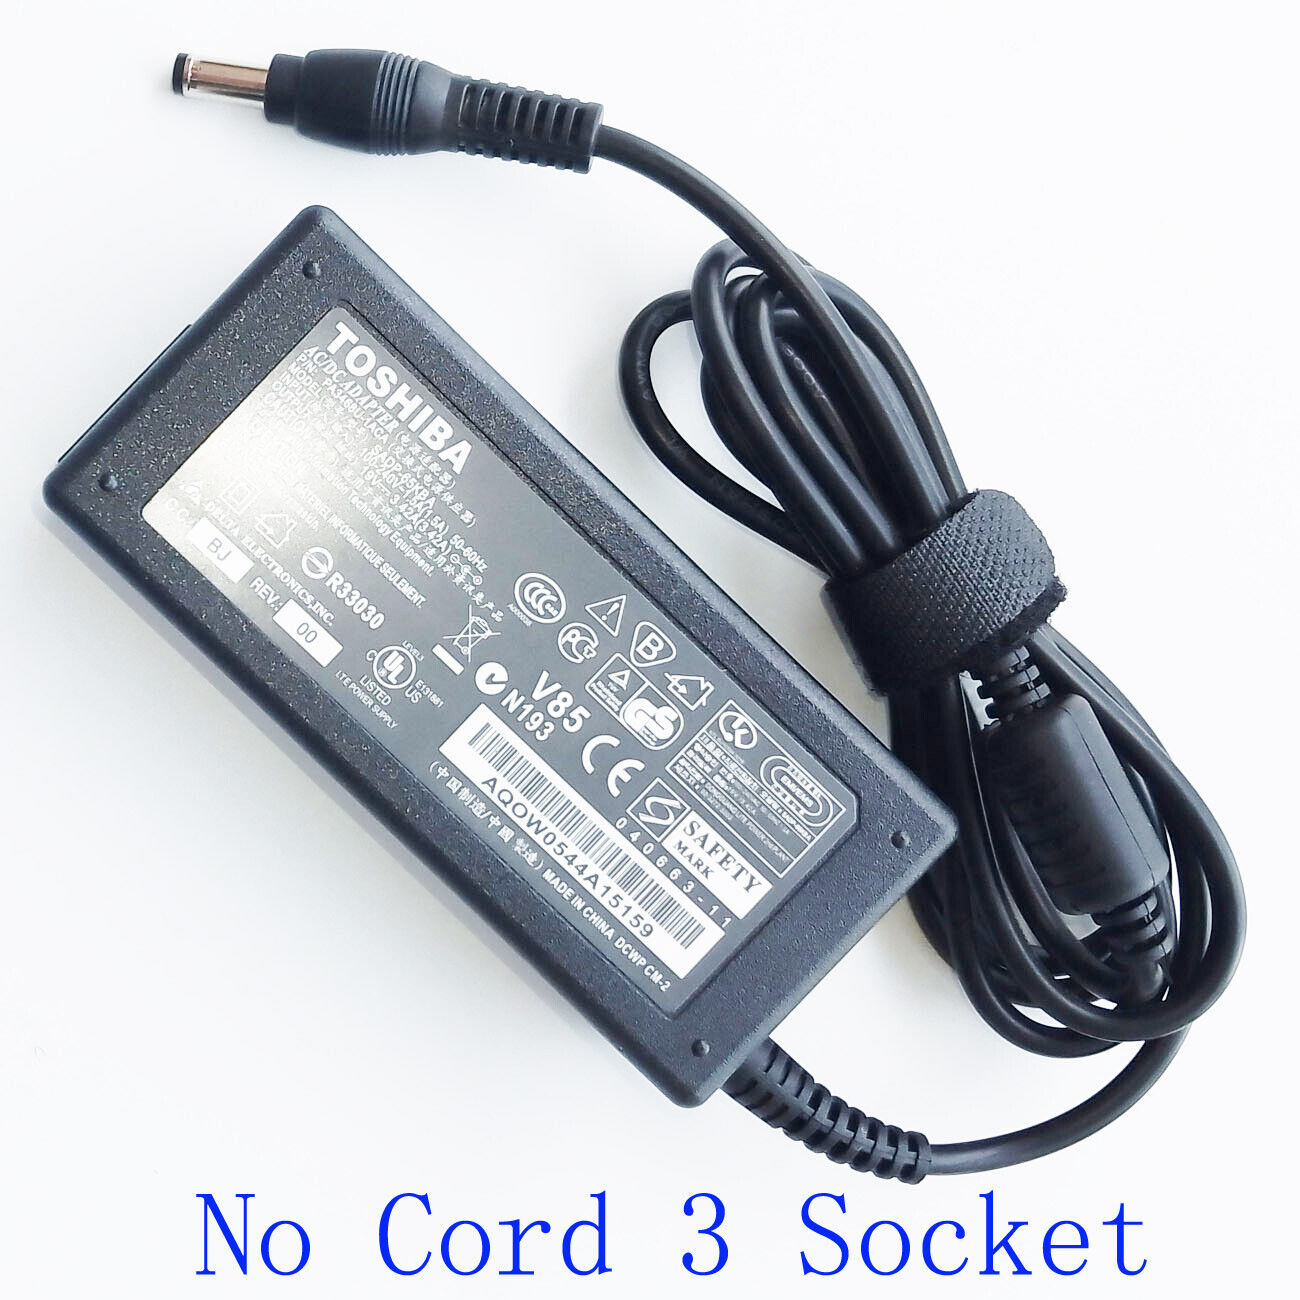 Genuine Battery Charger For Toshiba Satellite L755D-S5104 L755D-S5106 L775D-S720